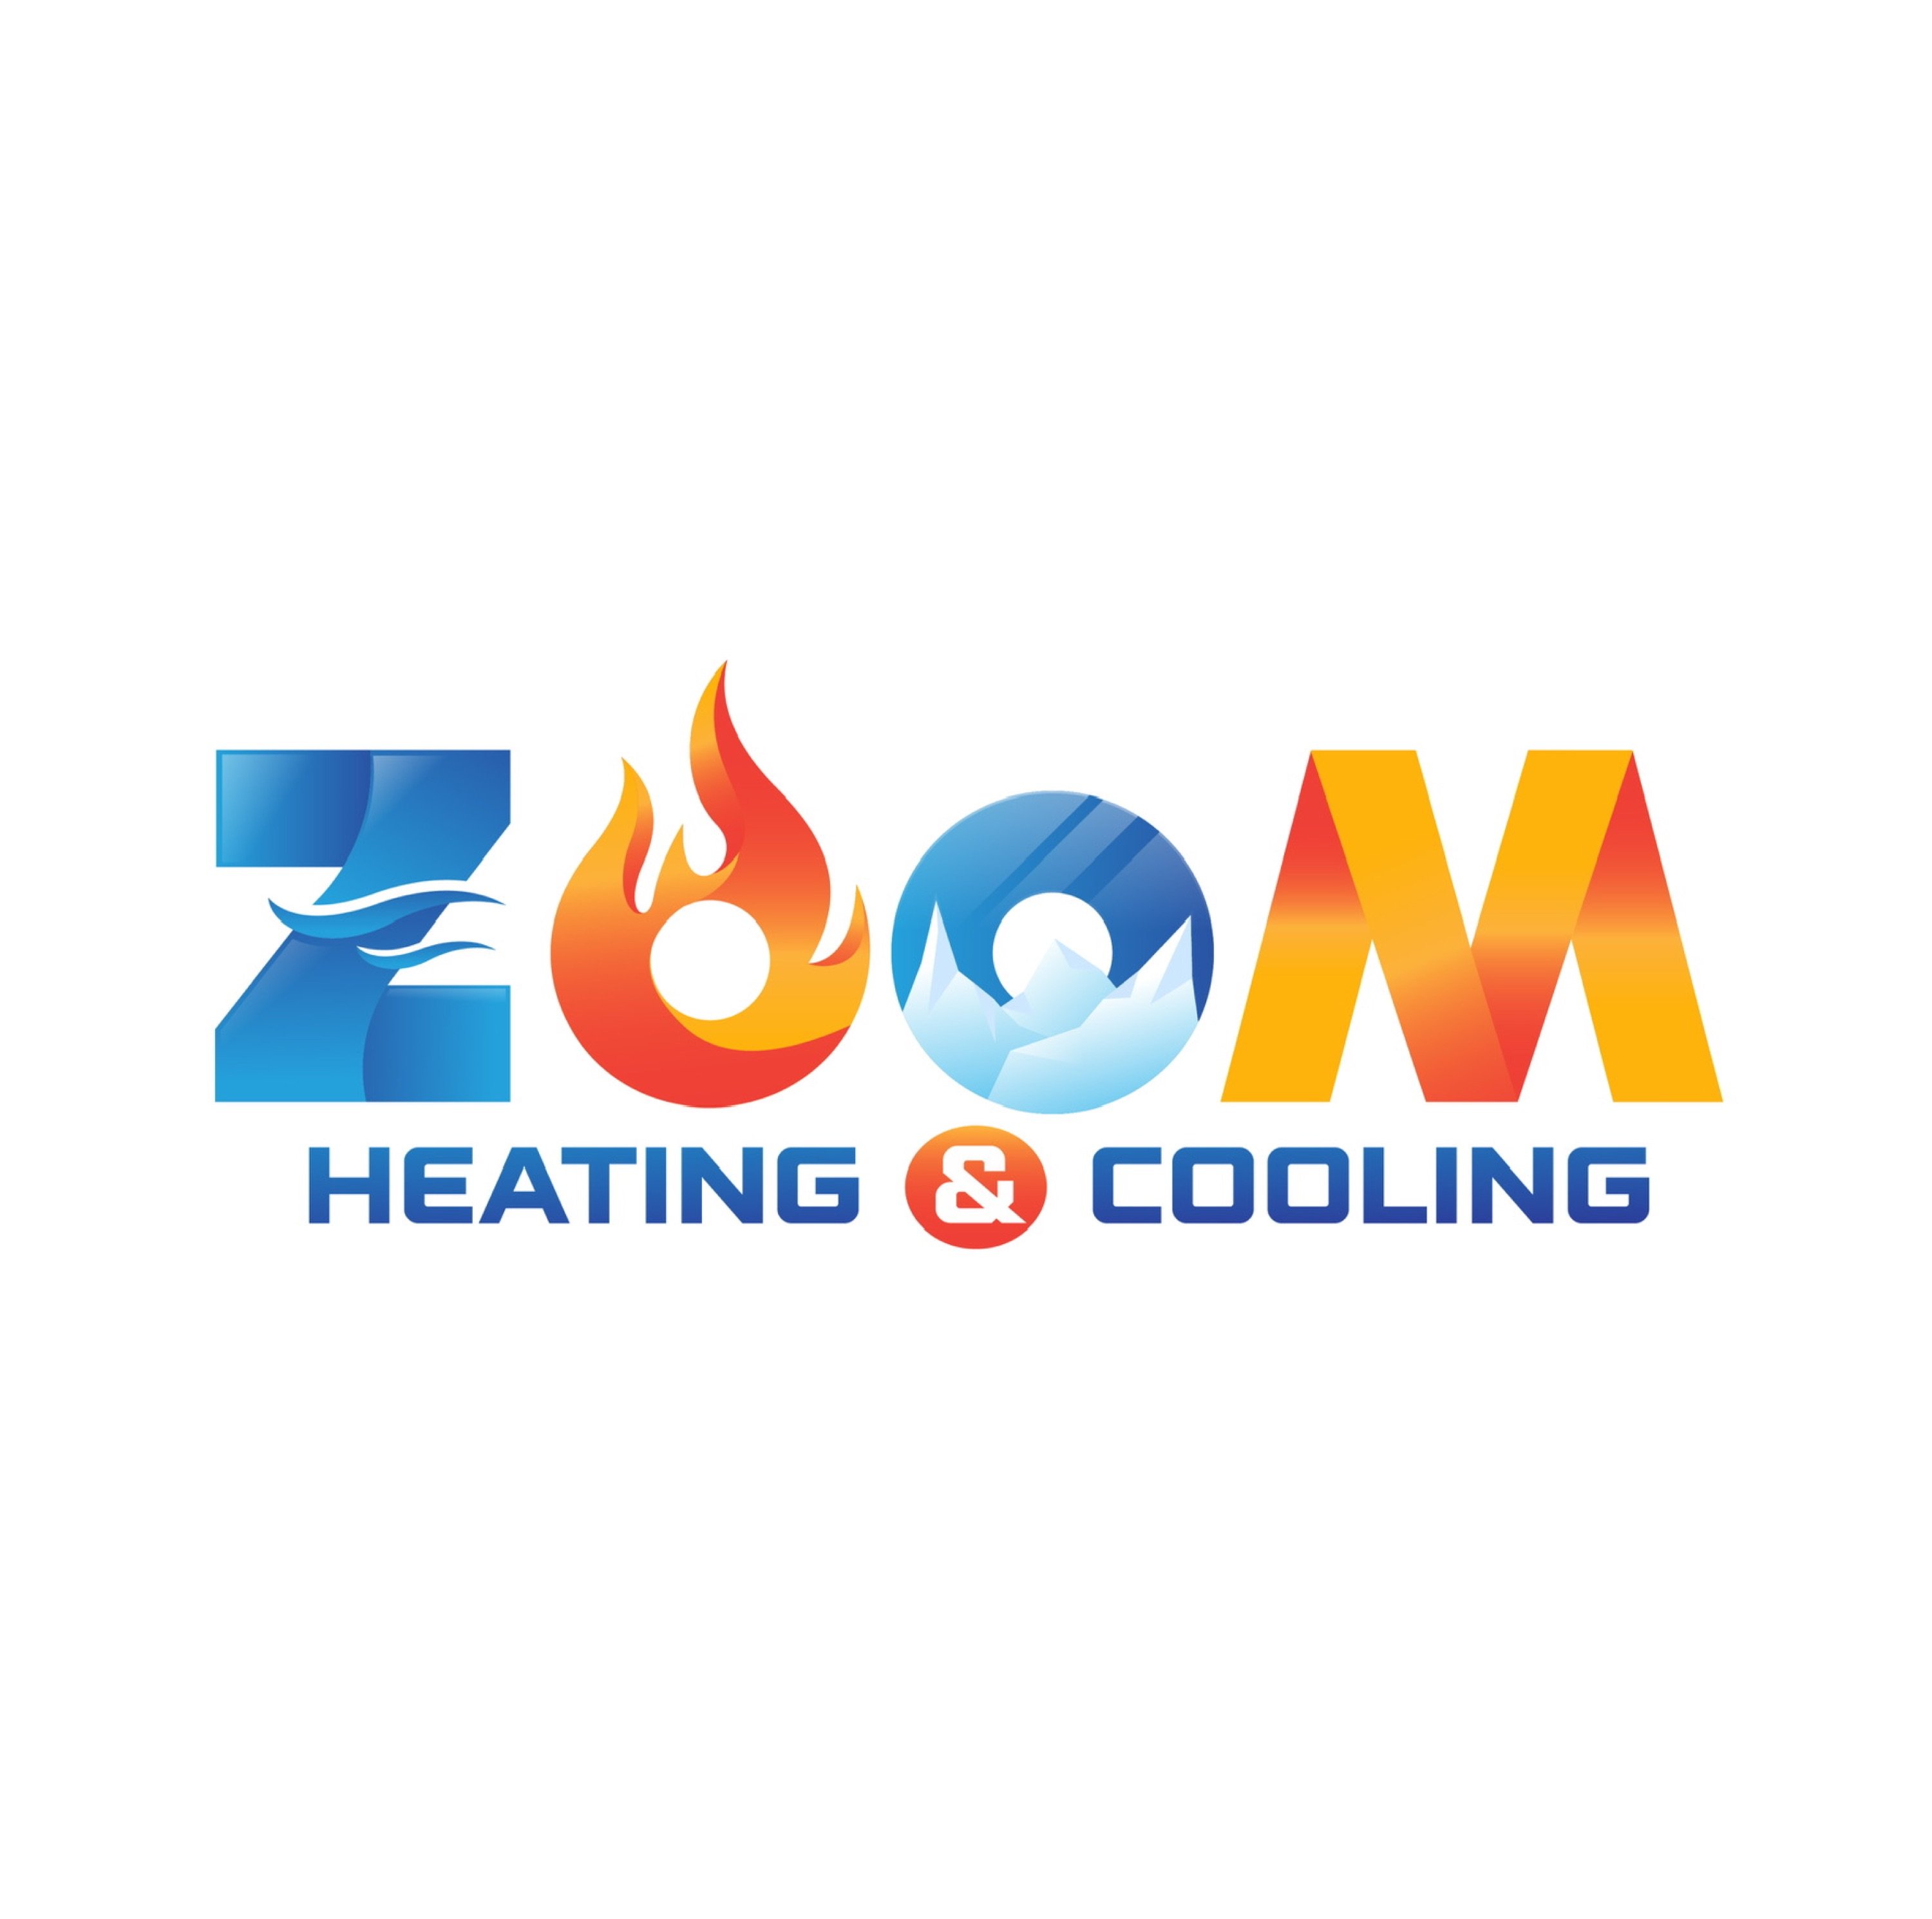 Zoom Heating & Cooling Logo